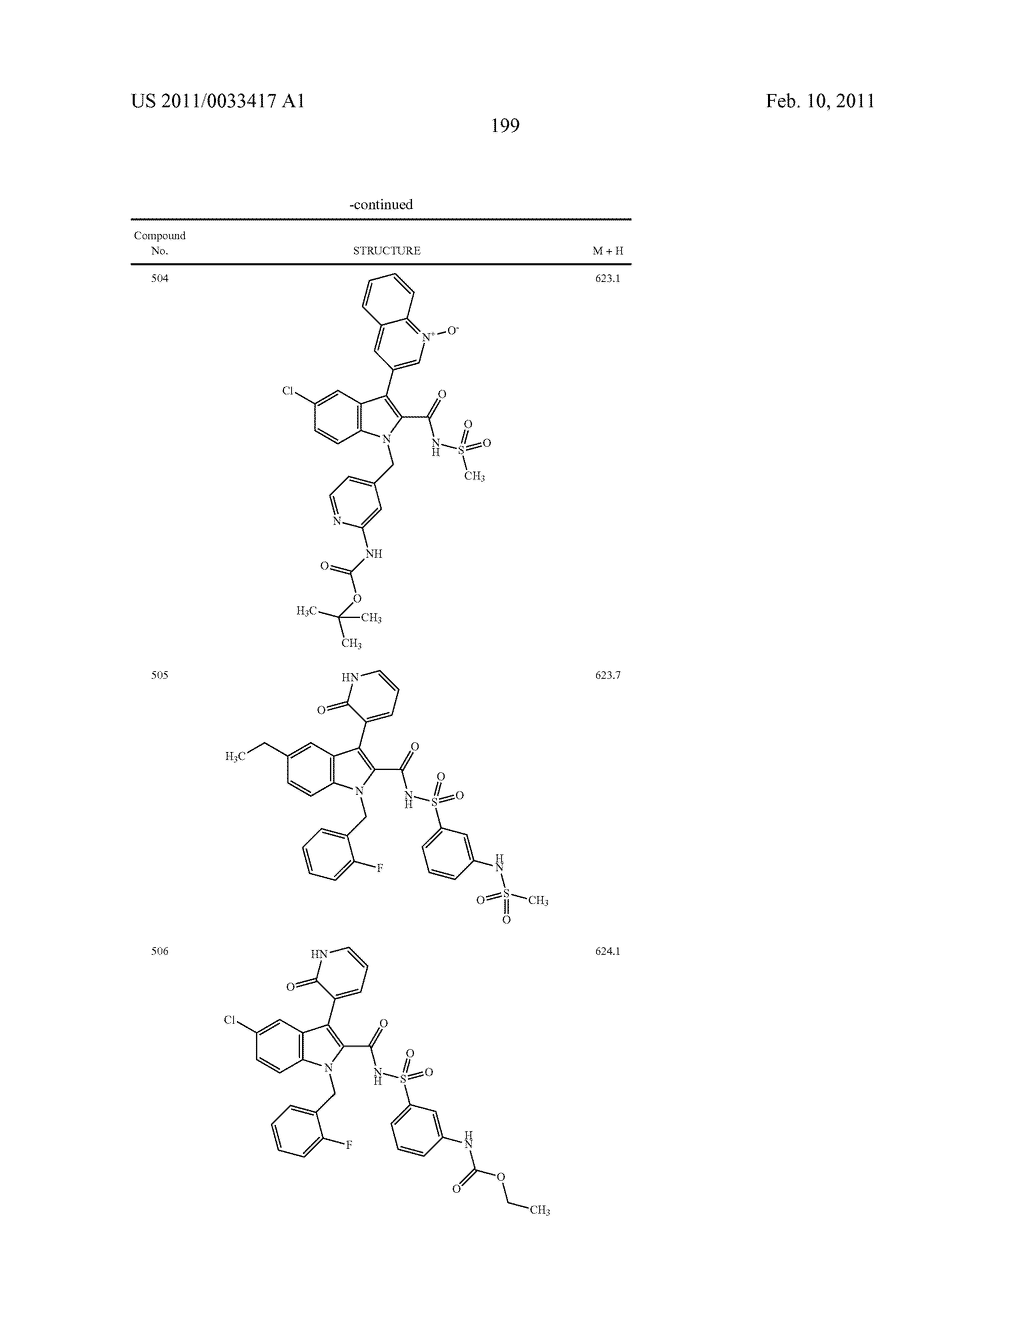 2,3-SUBSTITUTED INDOLE DERIVATIVES FOR TREATING VIRAL INFECTIONS - diagram, schematic, and image 200